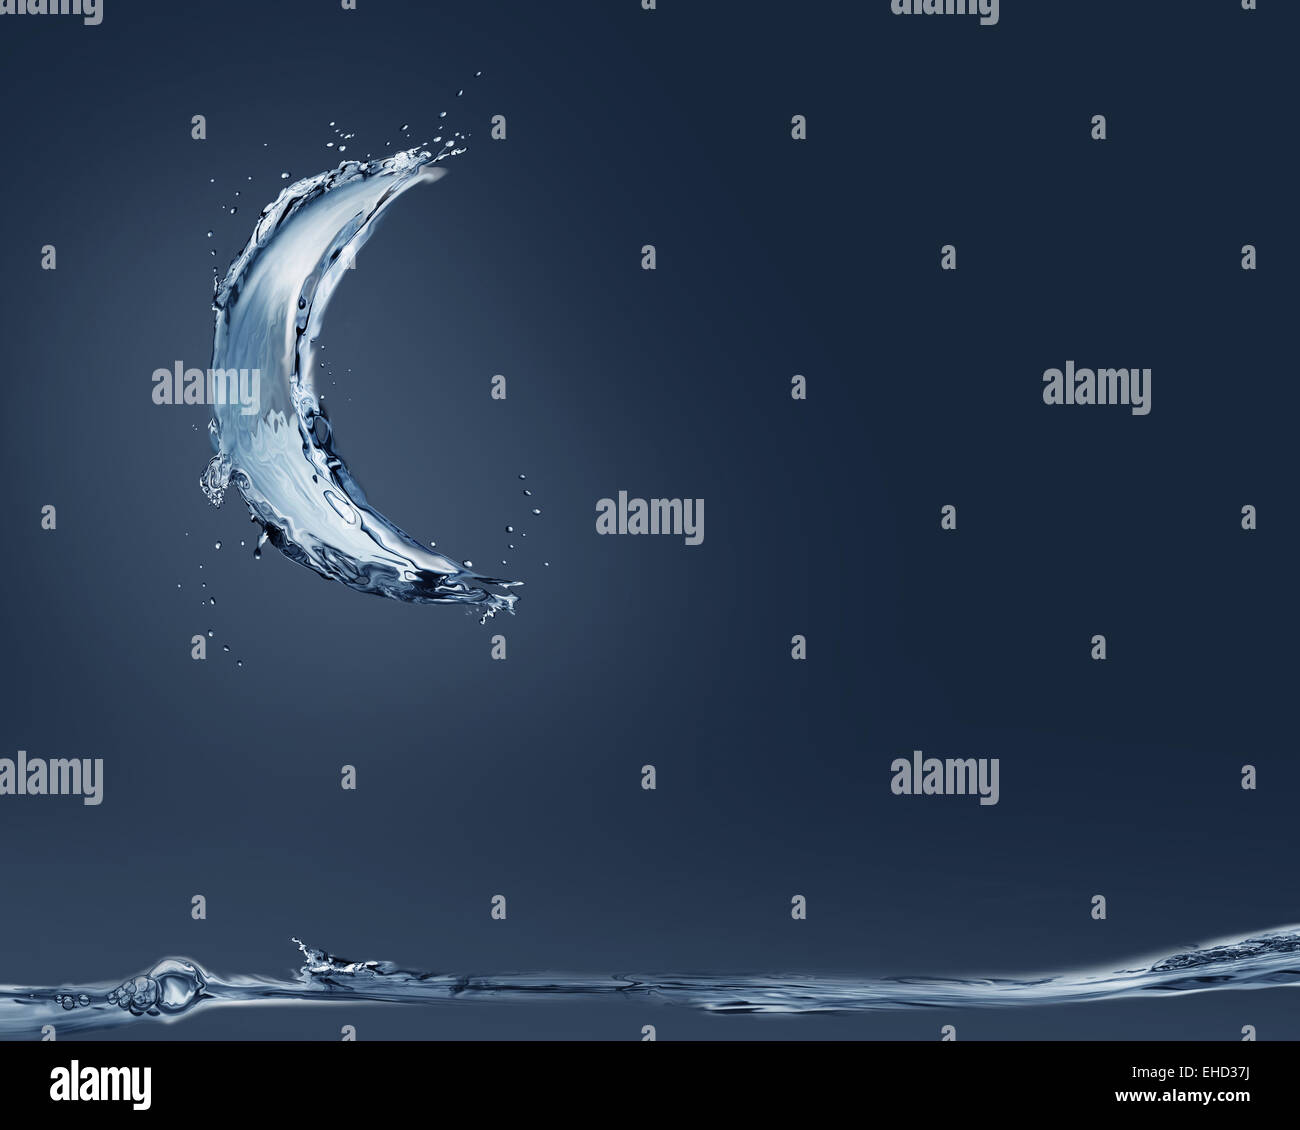 A crescent made of water shining moonlight on the scene Stock Photo - Alamy